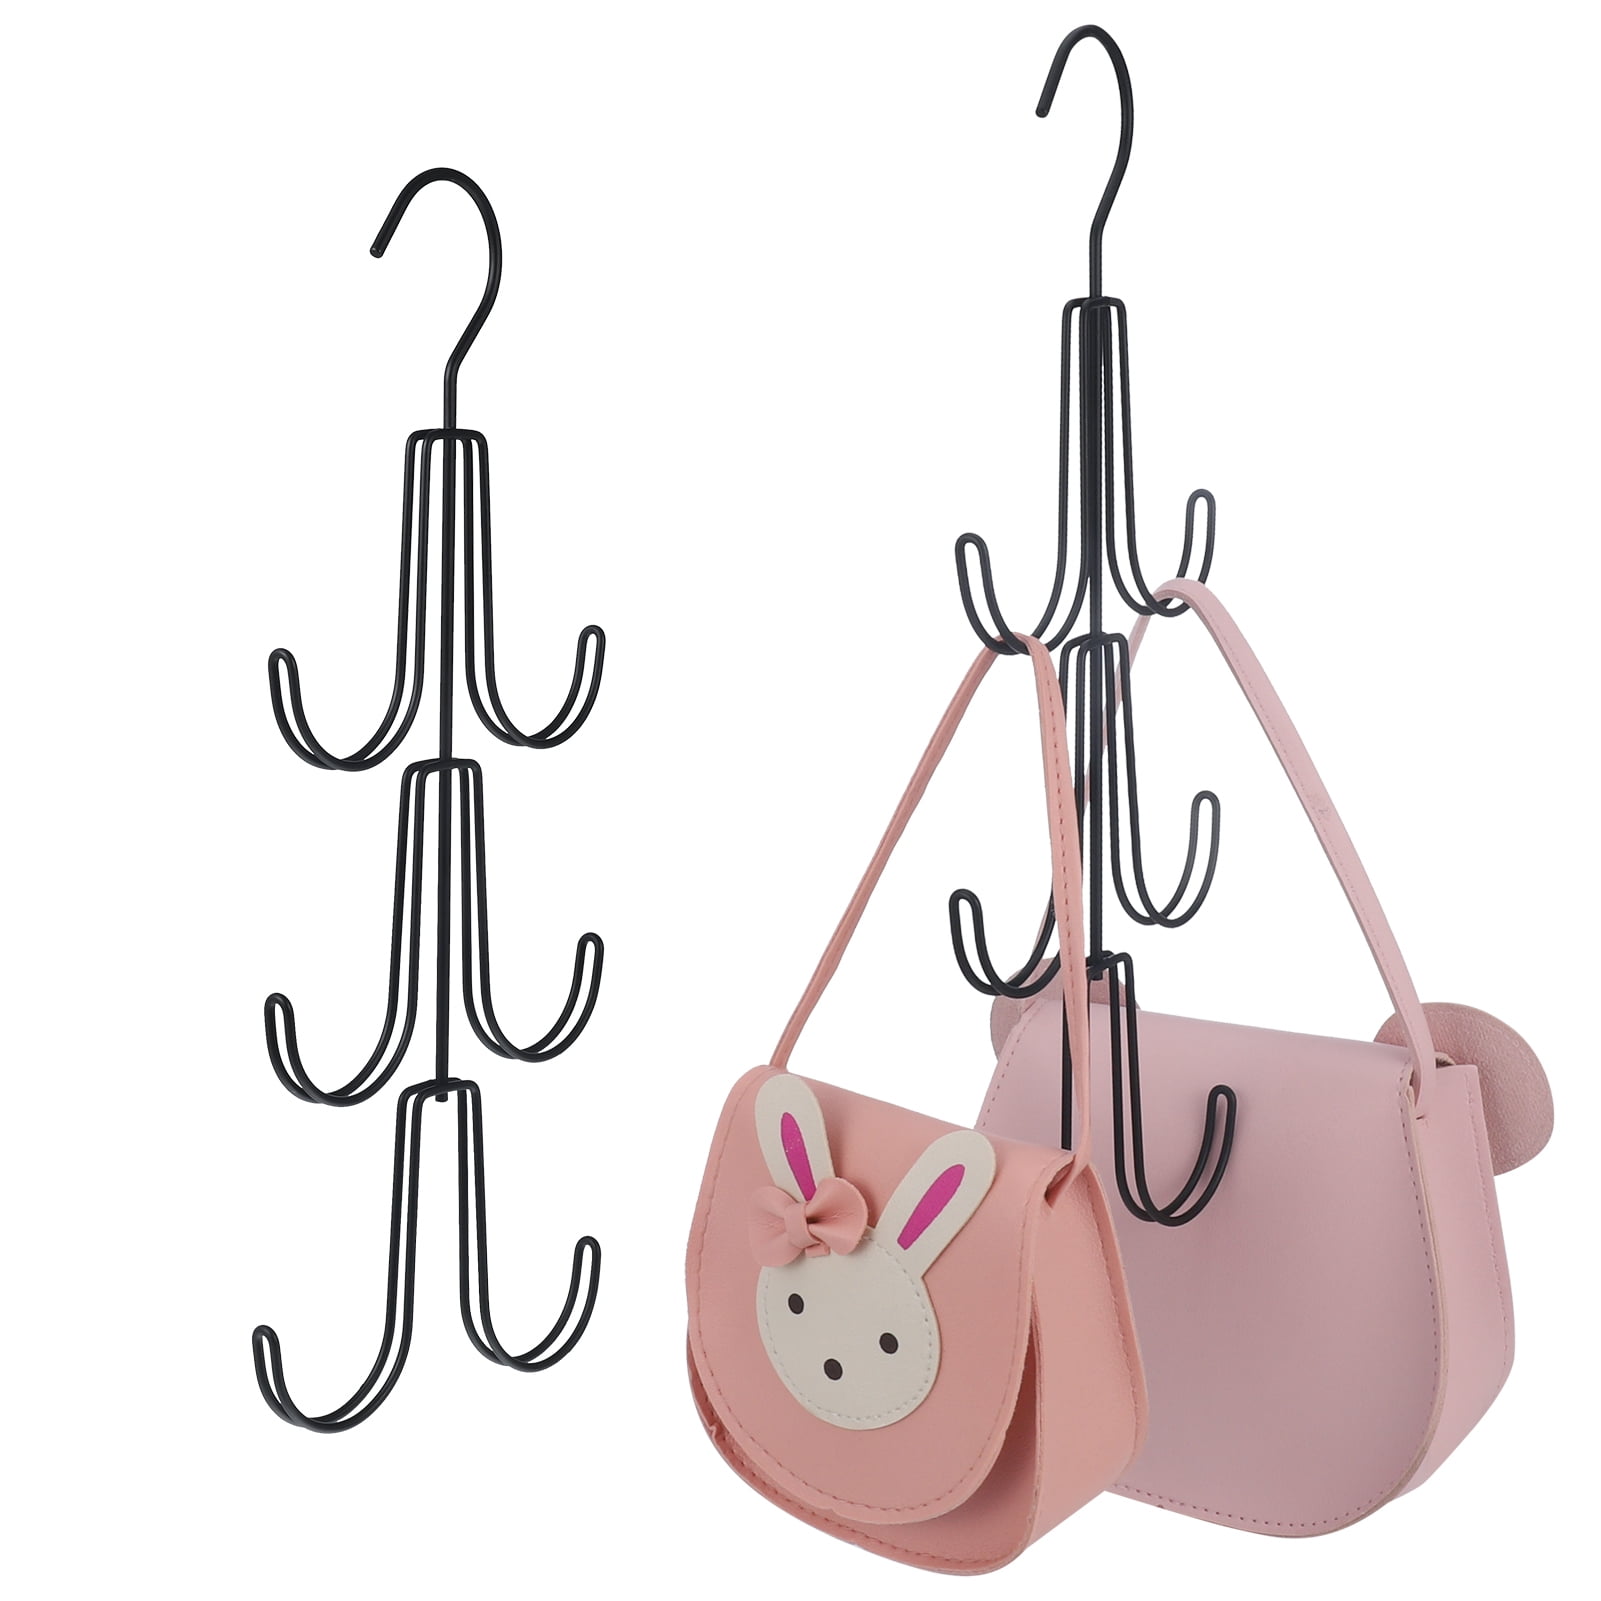 Snagshout  SHANDERBAR 12 Pack Purse Hanger for Closets - Large Closet Rod  Hooks with 90 Degree Design and Unique Twisted Appearance - Ideal for  Hanging Bags, Belts, Scarves, Hats, and Clothes - Black Color.